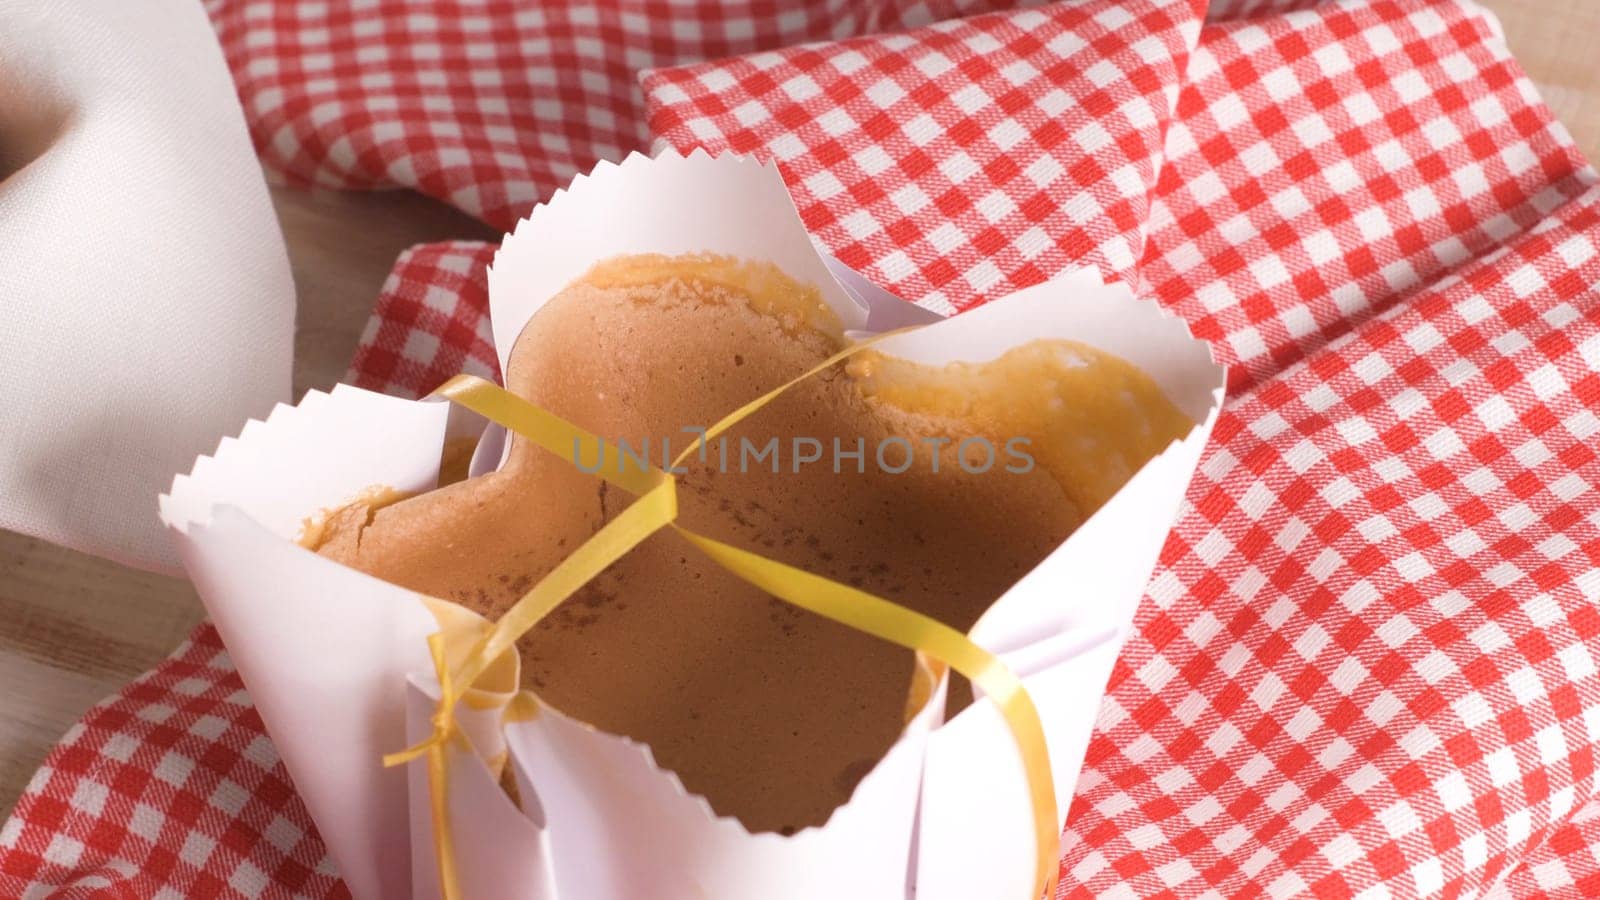 Portuguese sponge cake wrapped in the typical paper used on the baking, on wooden background.